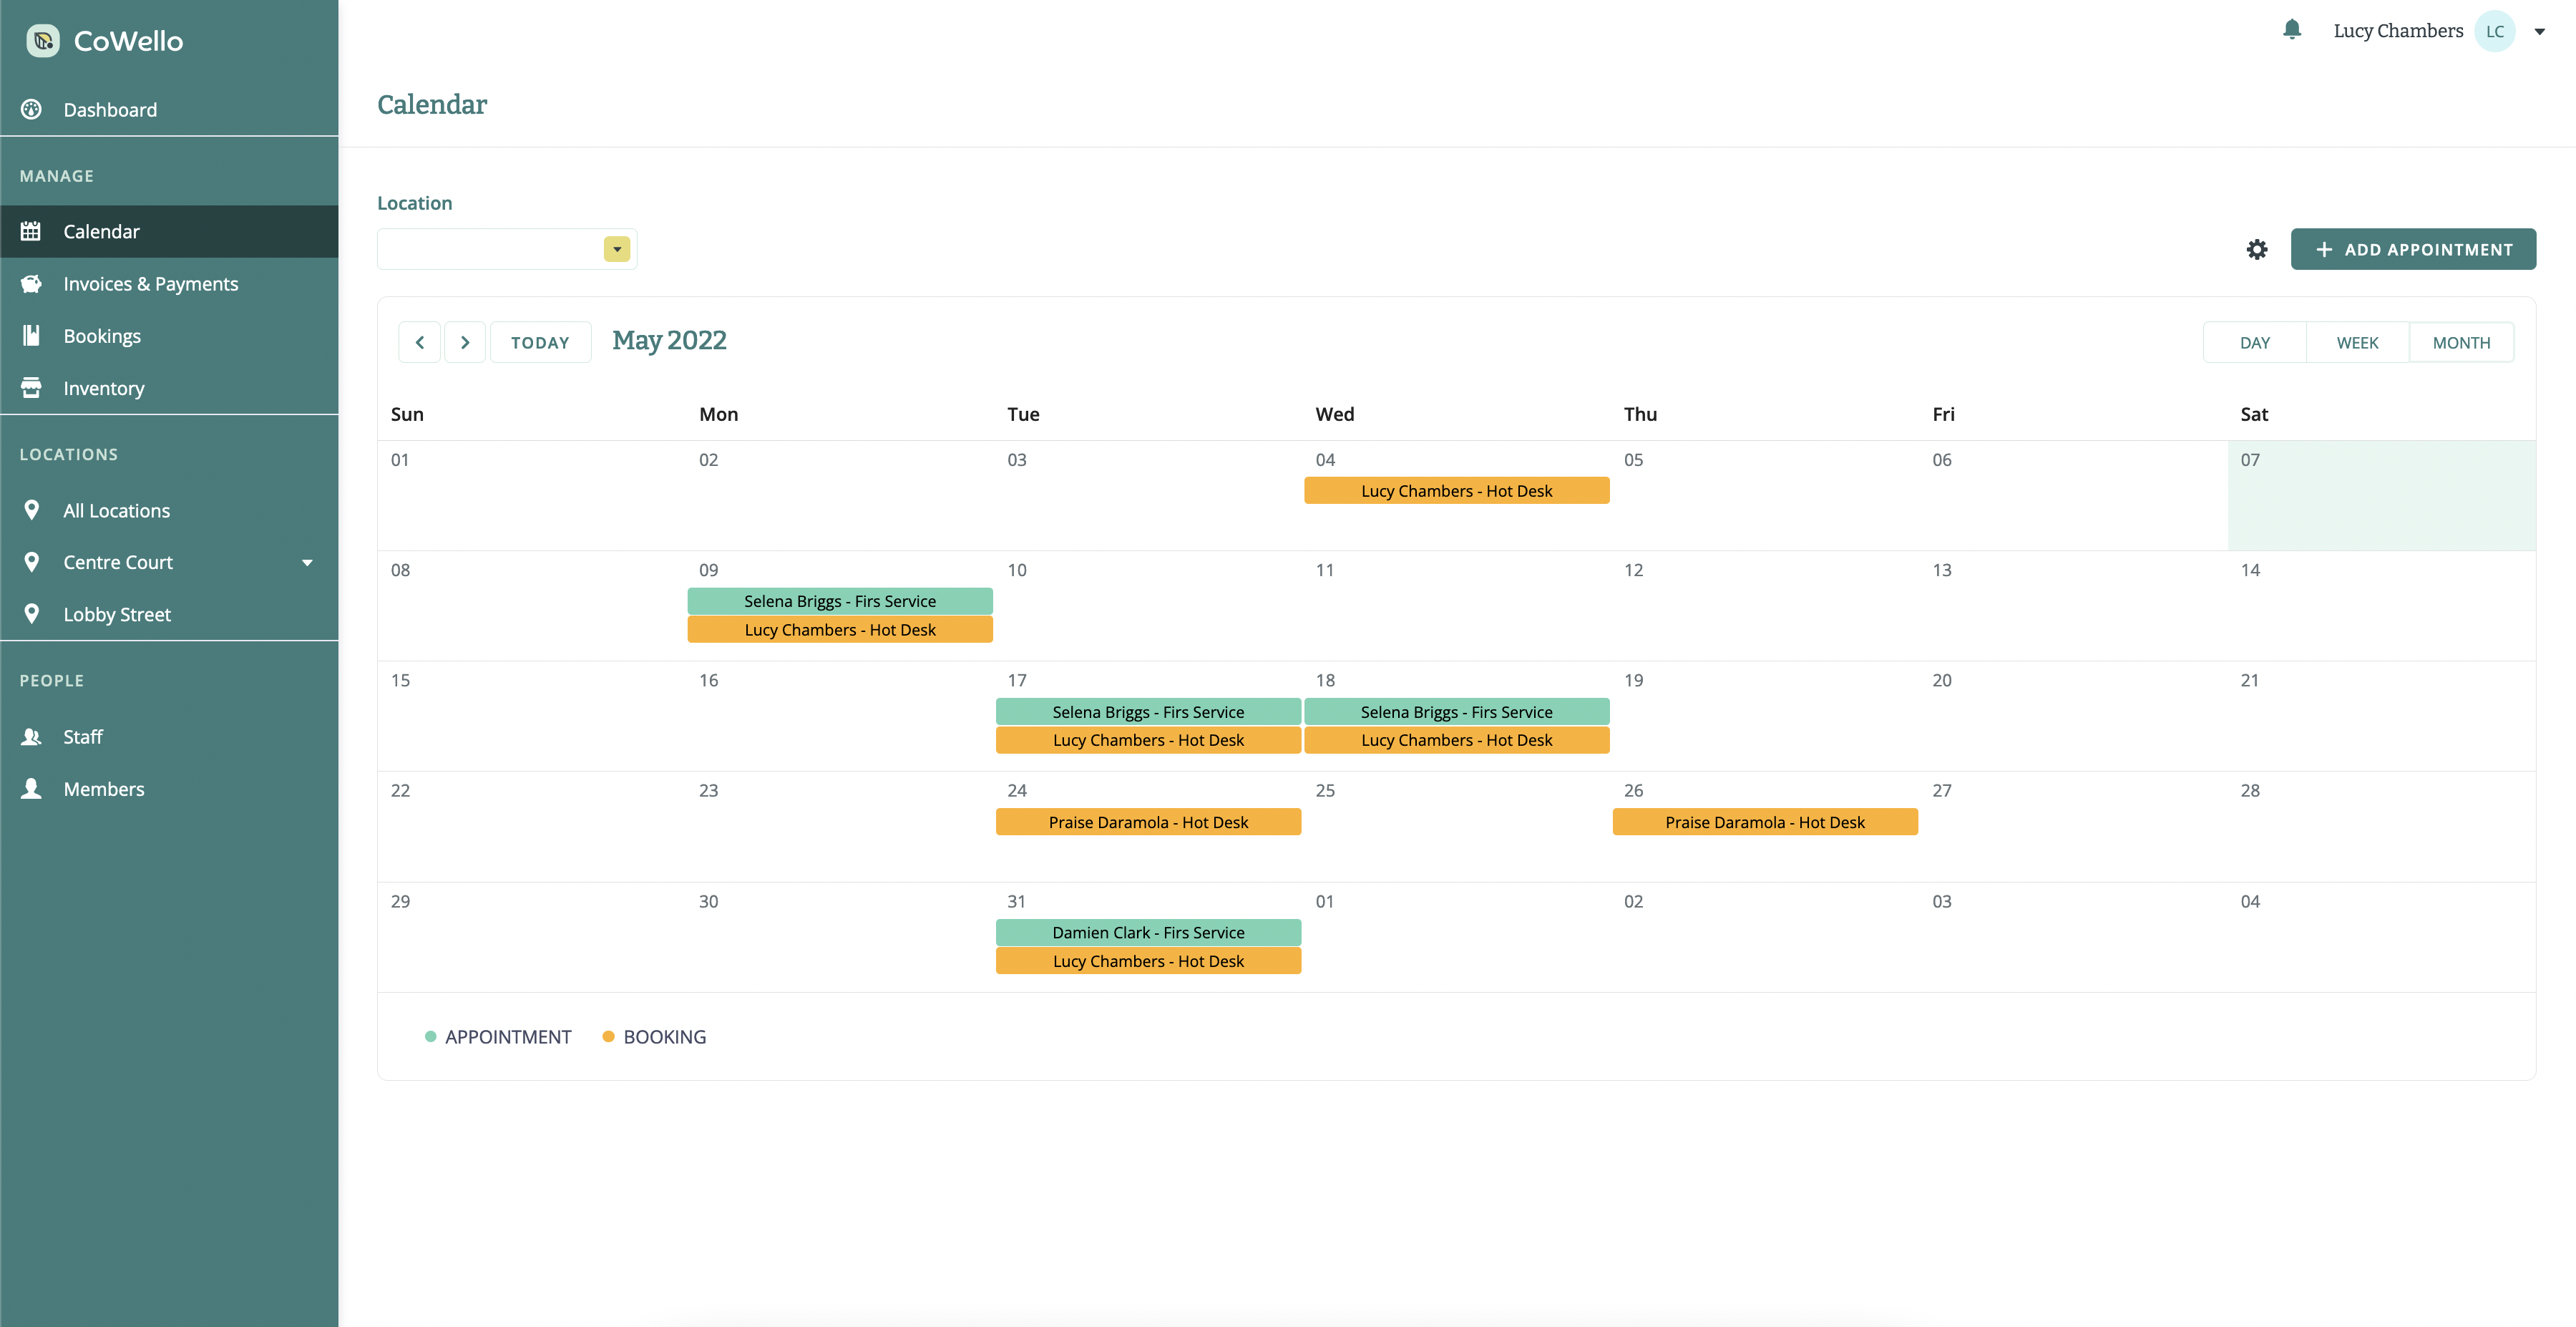 Integrate with your Google Calendar to view your entire schedule